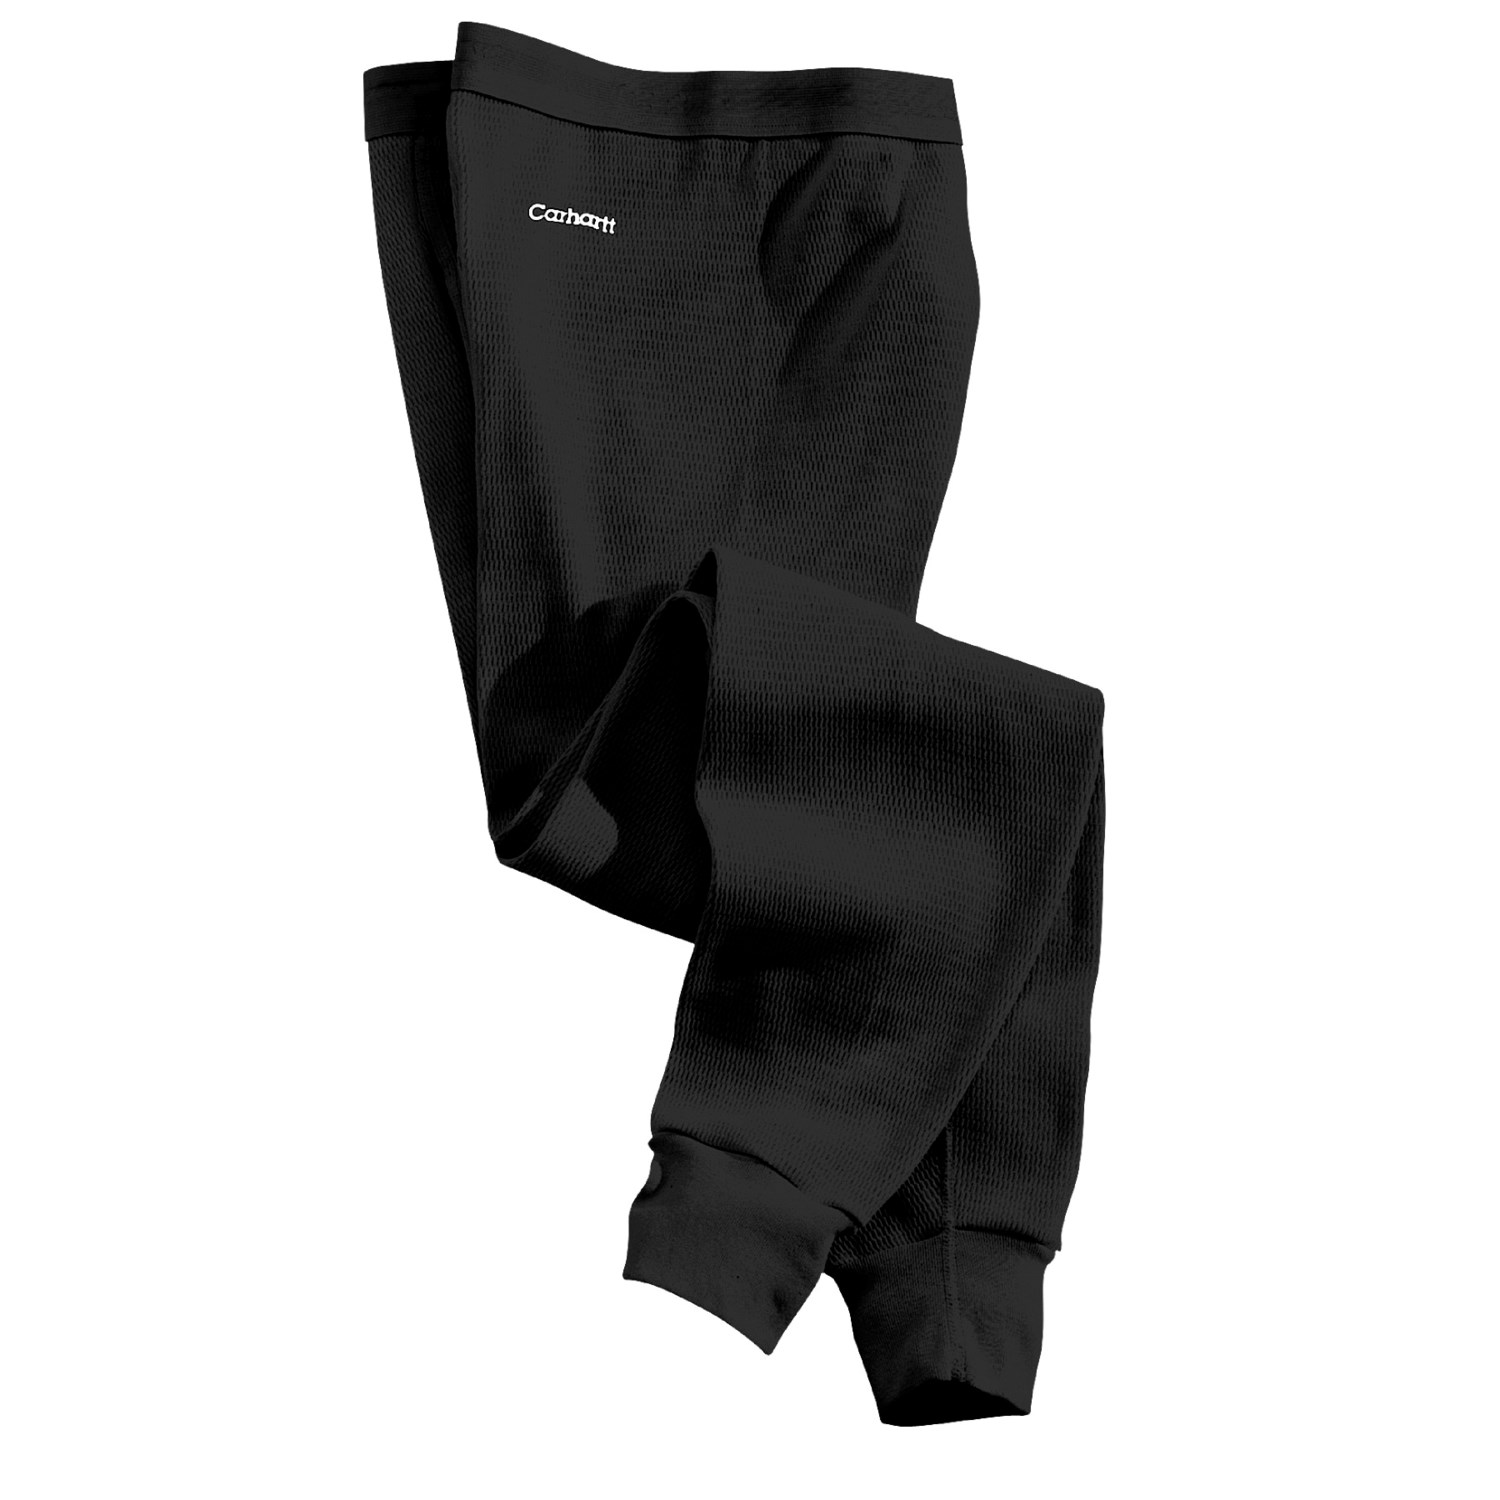 Carhartt Cotton Thermal Base Layer Bottoms (For Tall Men)